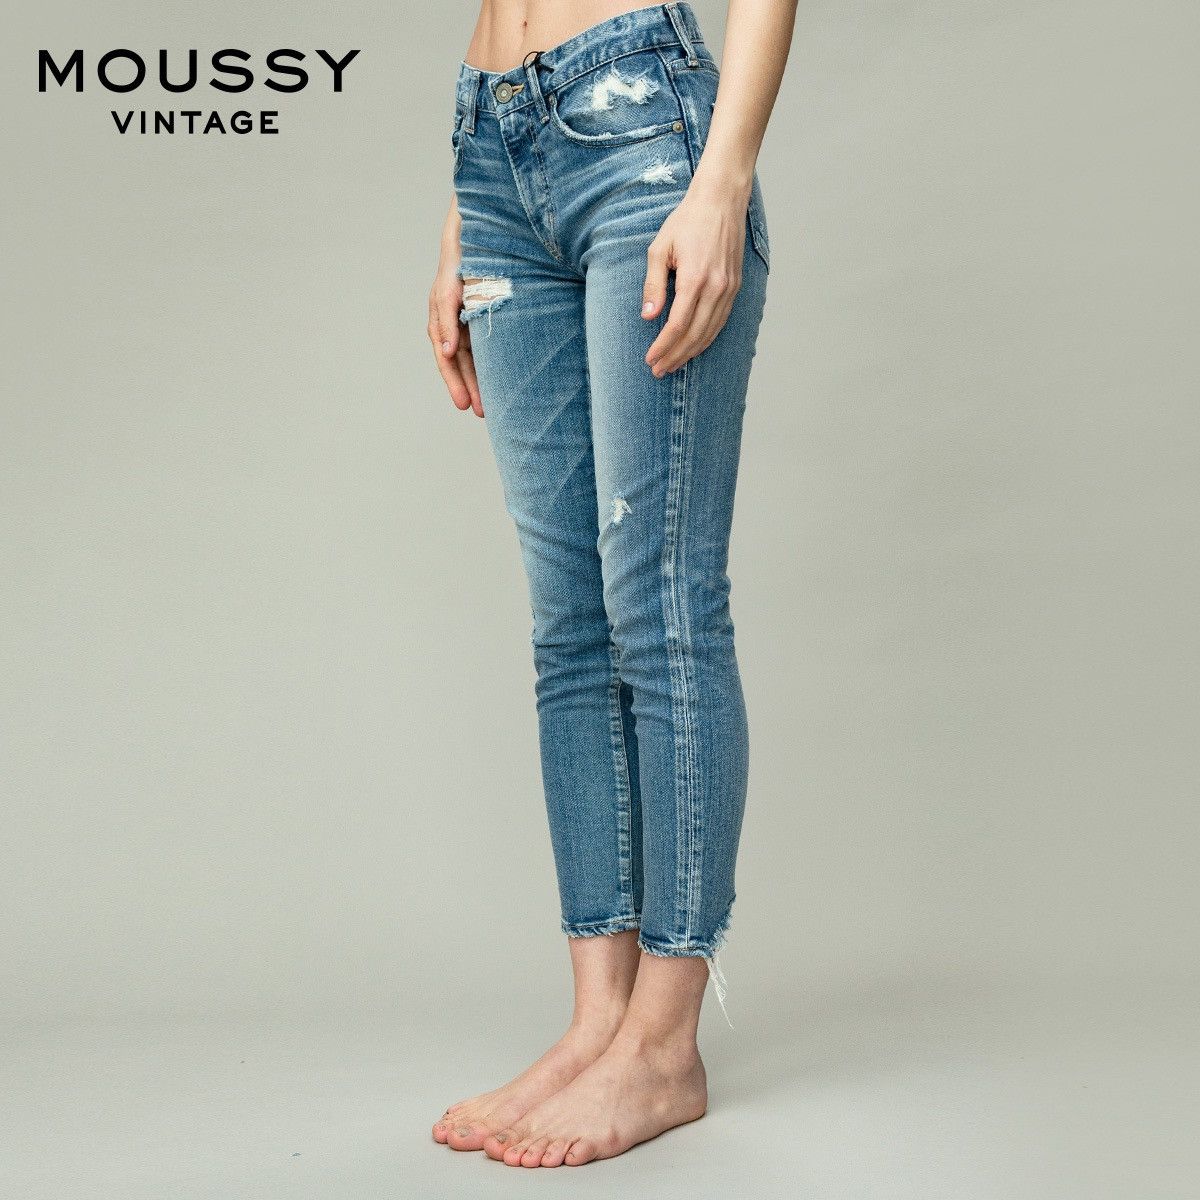 Japanese Brand Moussy Vintage Distressed Blue Jeans Size 27" / US 4 / IT 40 - 2 Preview